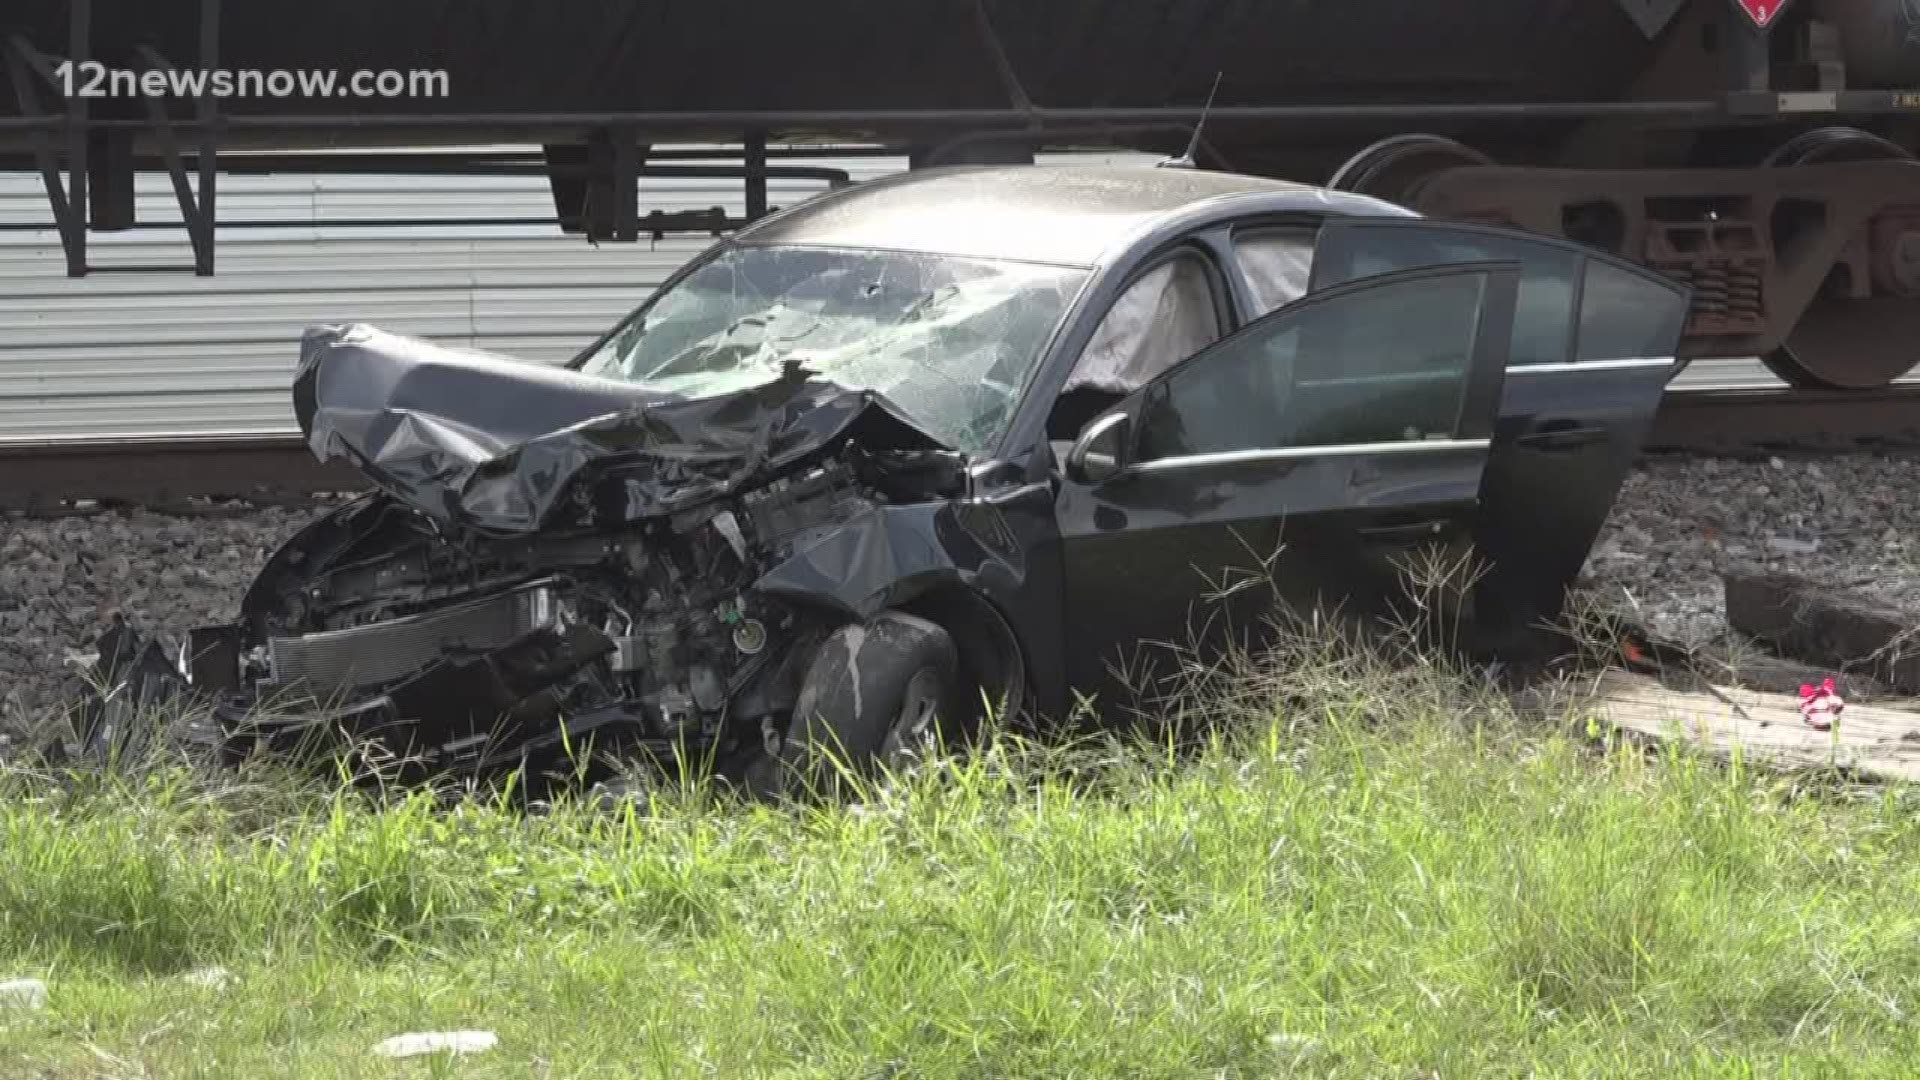 2 adults, one infant sent to hospital after car struck by train in Port Arthur